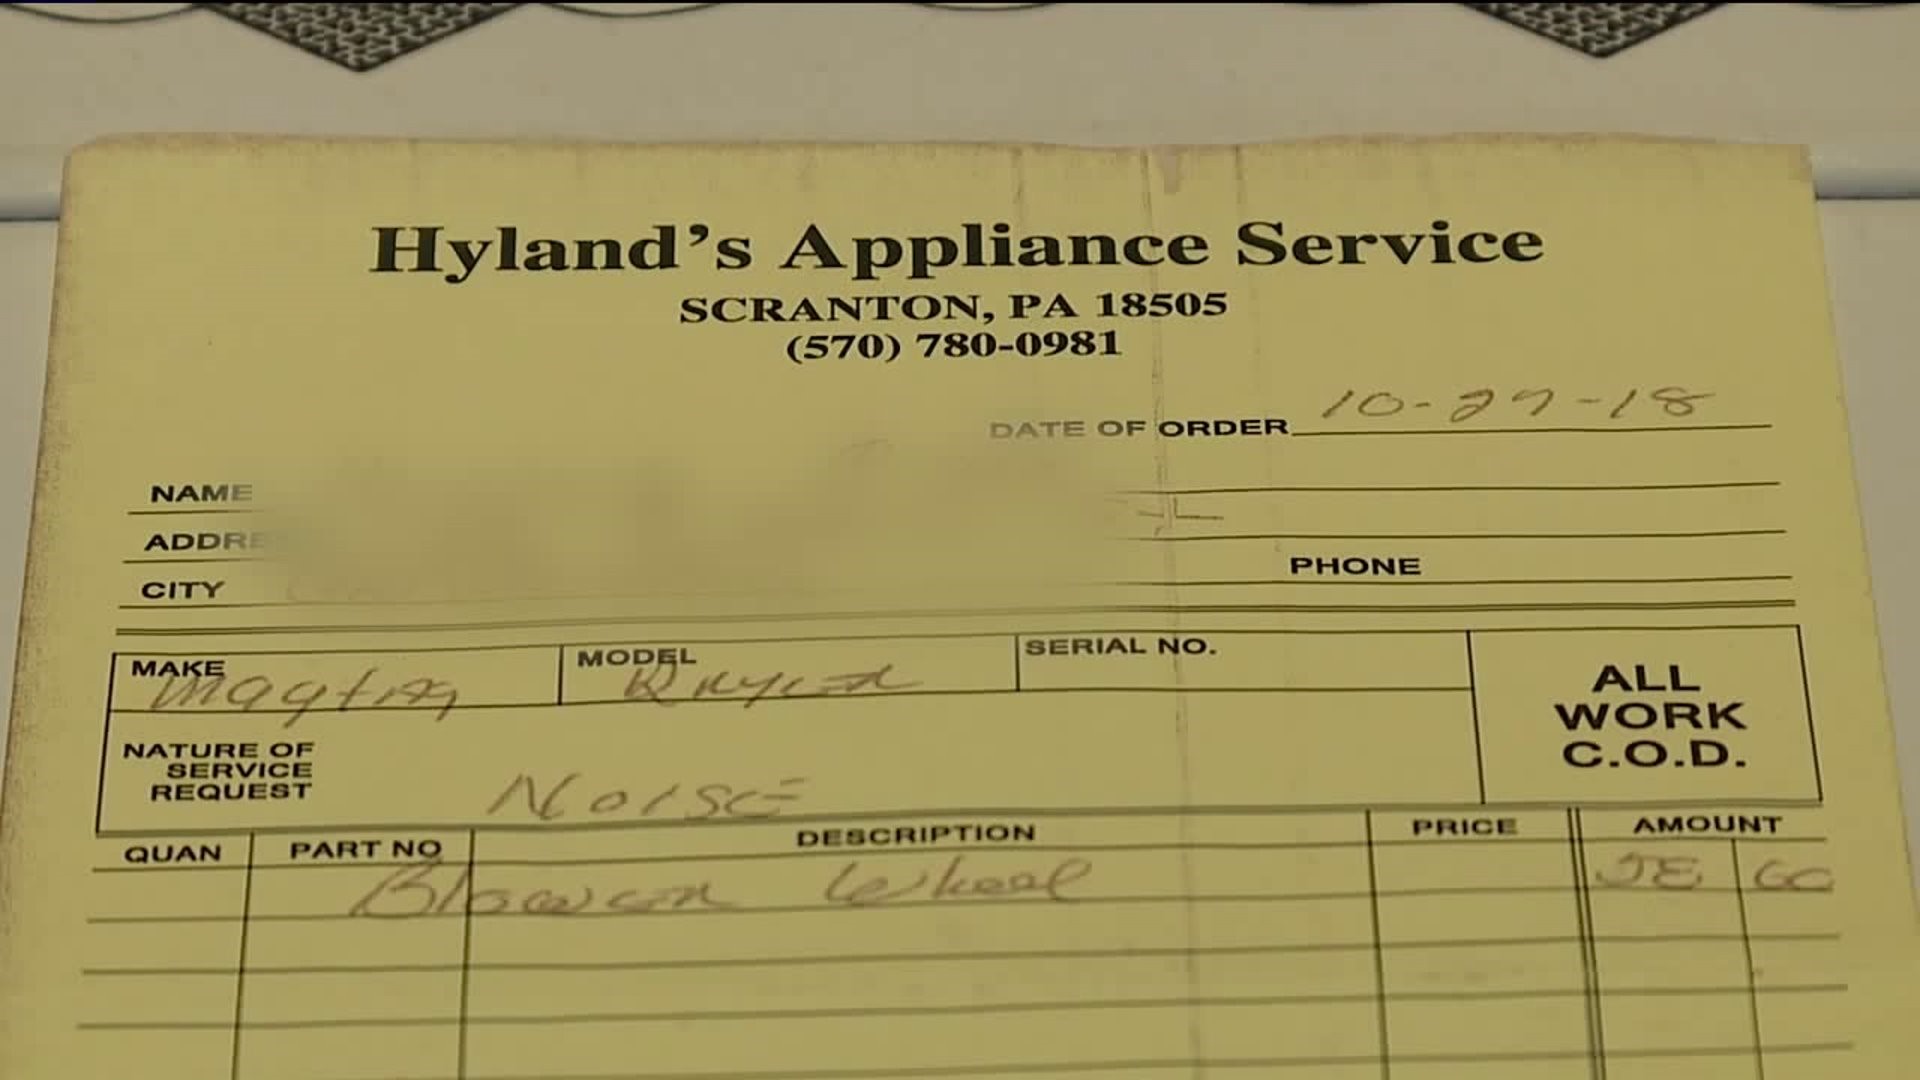 Repairman Accused of Ripping off Customers